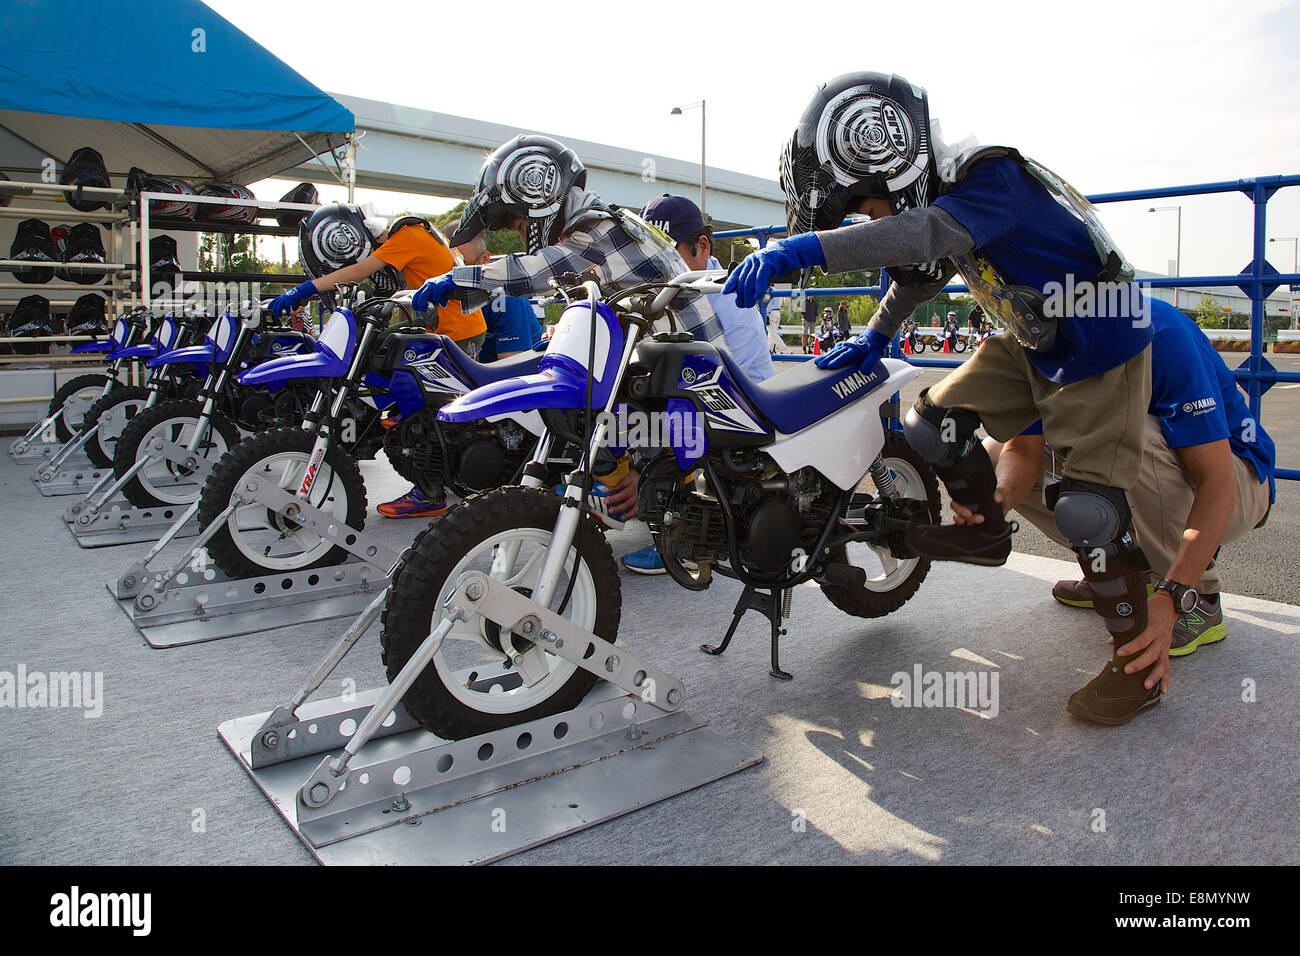 Odaiba, Tokyo, Japan. 11th Oct, 2014. Children test Yamaha motorcycles during the Tokyo Motor Fes 2014. The Tokyo Motor Fes 2014 runs from October 11th to 13th with the aim of giving visitors of all ages a chance to interact with current and futuristic motorized vehicles. Held outside on reclaimed land in Tokyo Bay the event has enough space for visitors to test new vehicles and for a synchronized driving demonstration by the Cirque de Mobi. This year Mercedes-Benz and BMW will also participate along with 13 Japanese makers. Credit:  Aflo Co. Ltd./Alamy Live News Stock Photo